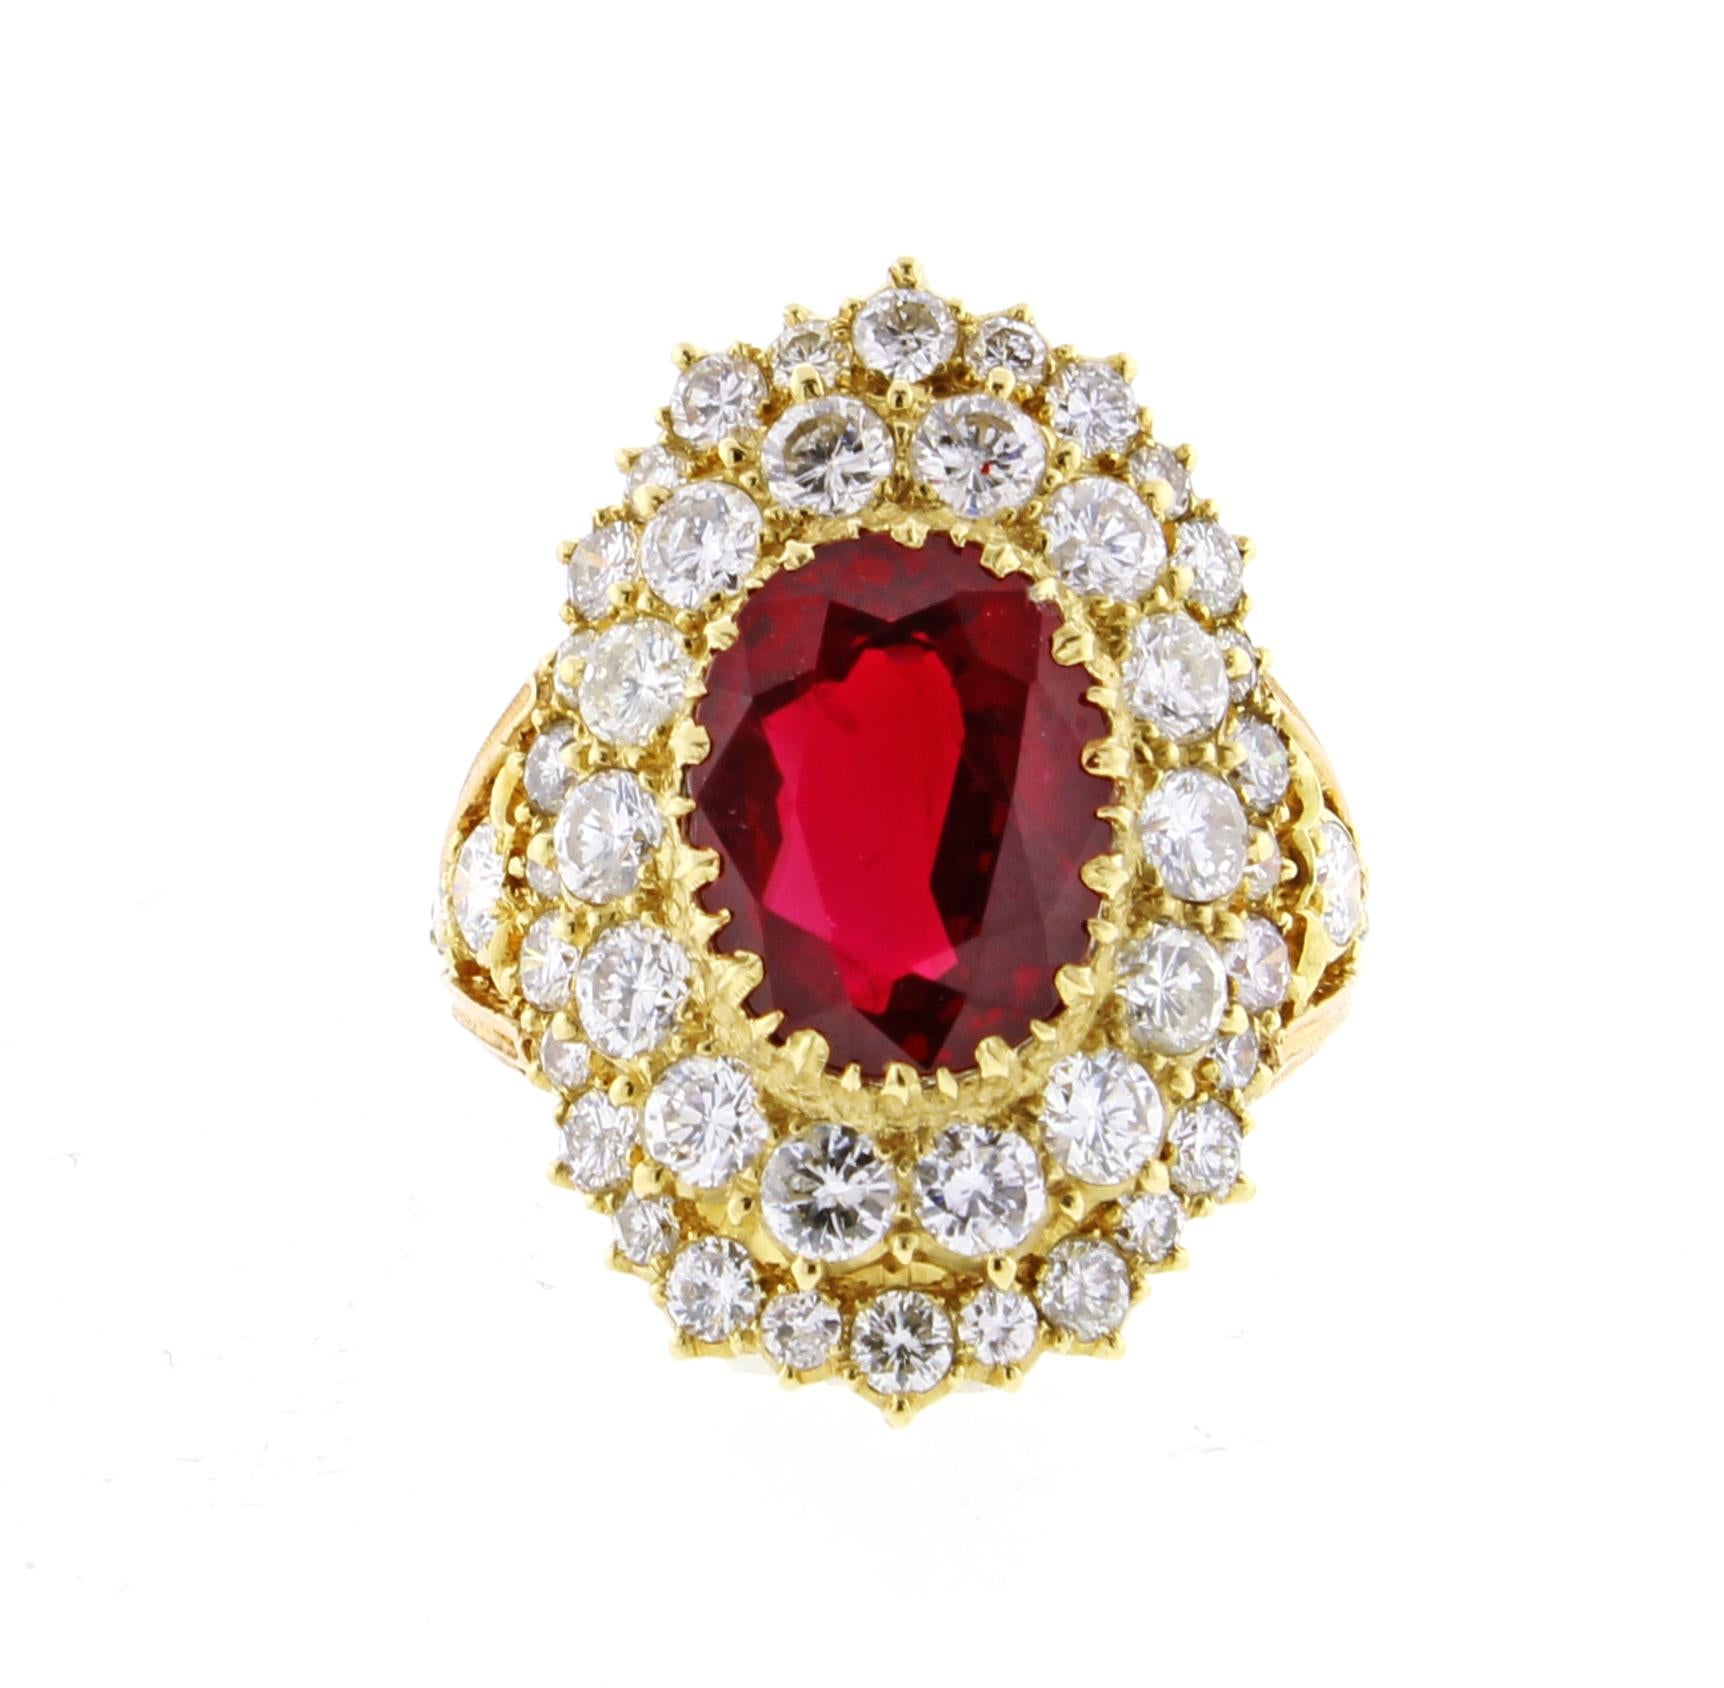 From Italian designer Buccellati, an impressive ruby and diamond ring. The ring features an oval gem ruby weighing 4.82 carats and 46 brilliant diamonds weighing approximately 3.15 carats. Handmade by Buccellati in 18 karat pink and yellow gold. The